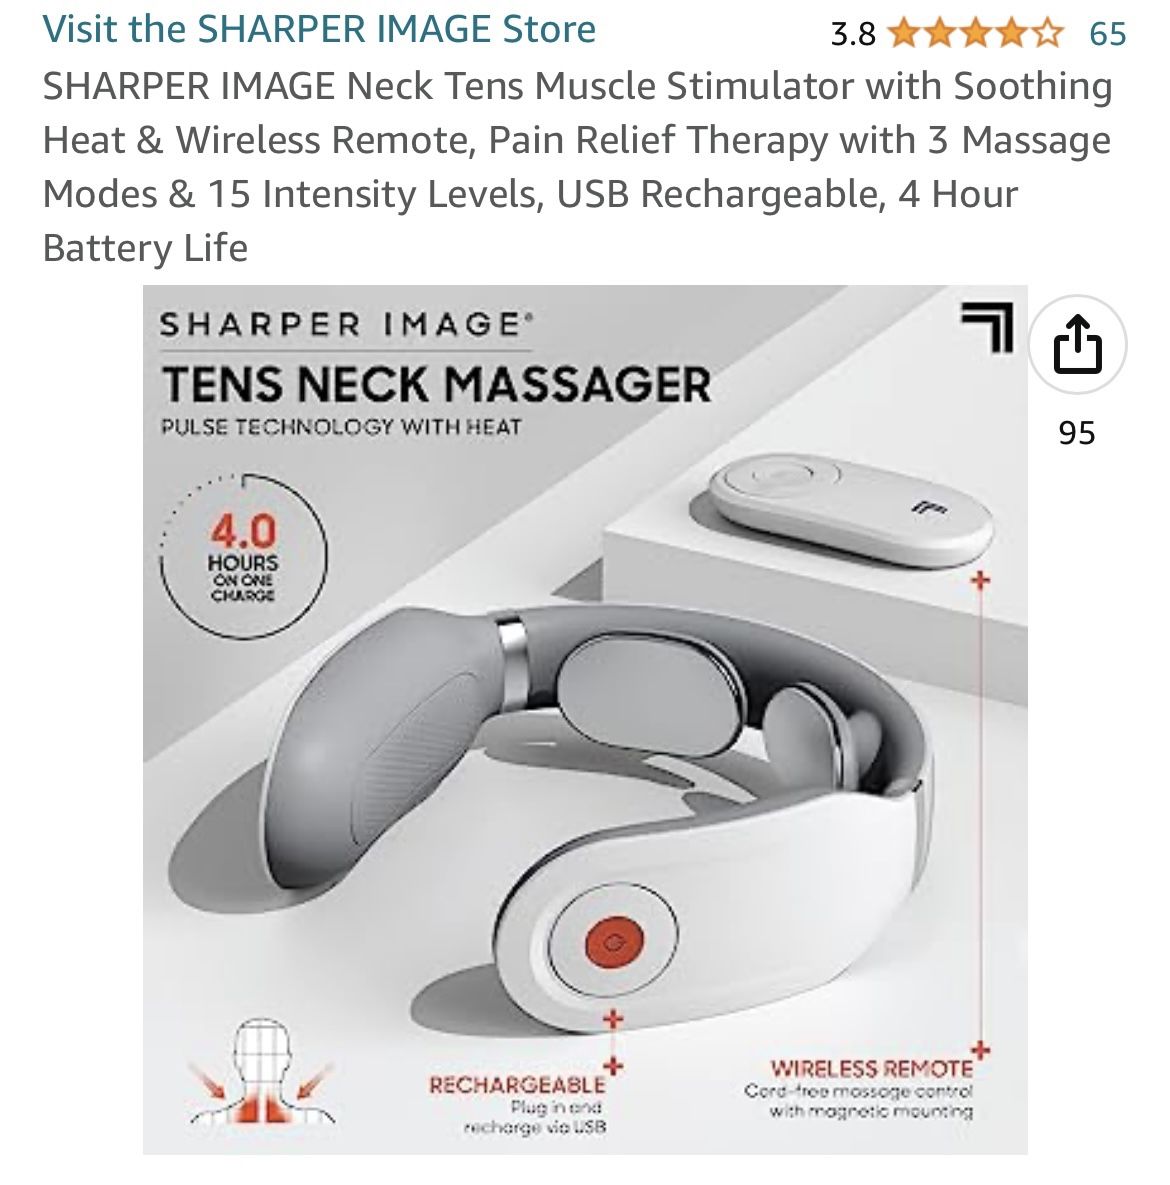 Sharper Image Neck Tens Massager With Pulse Technology And Heat